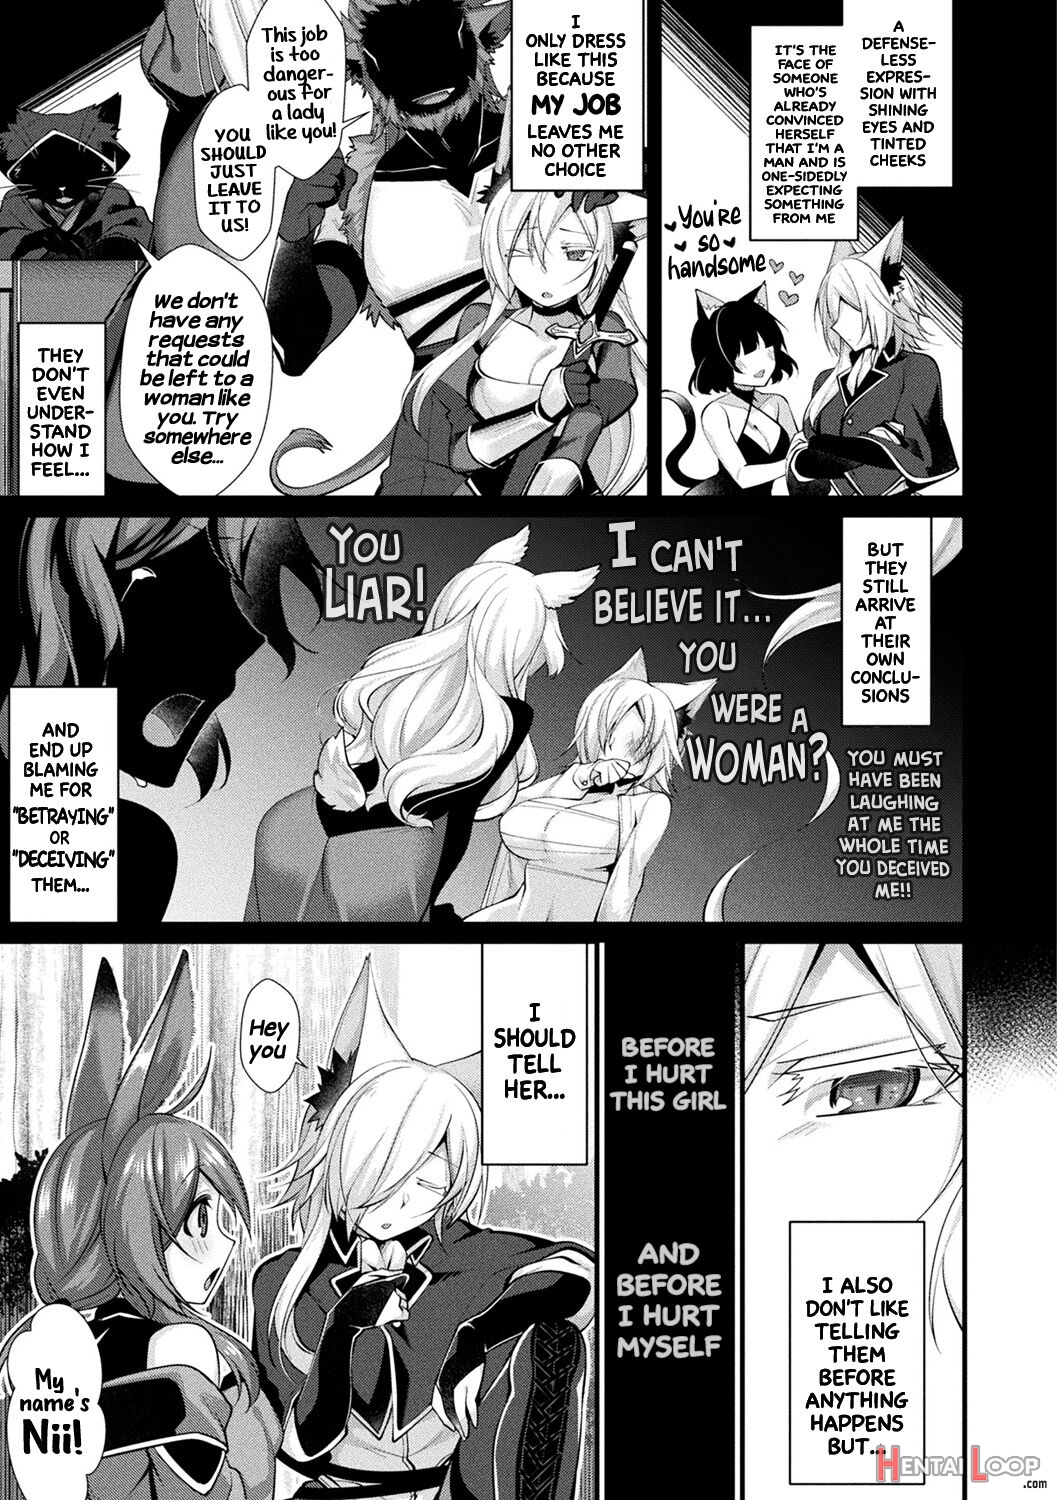 Melty Heart page 3